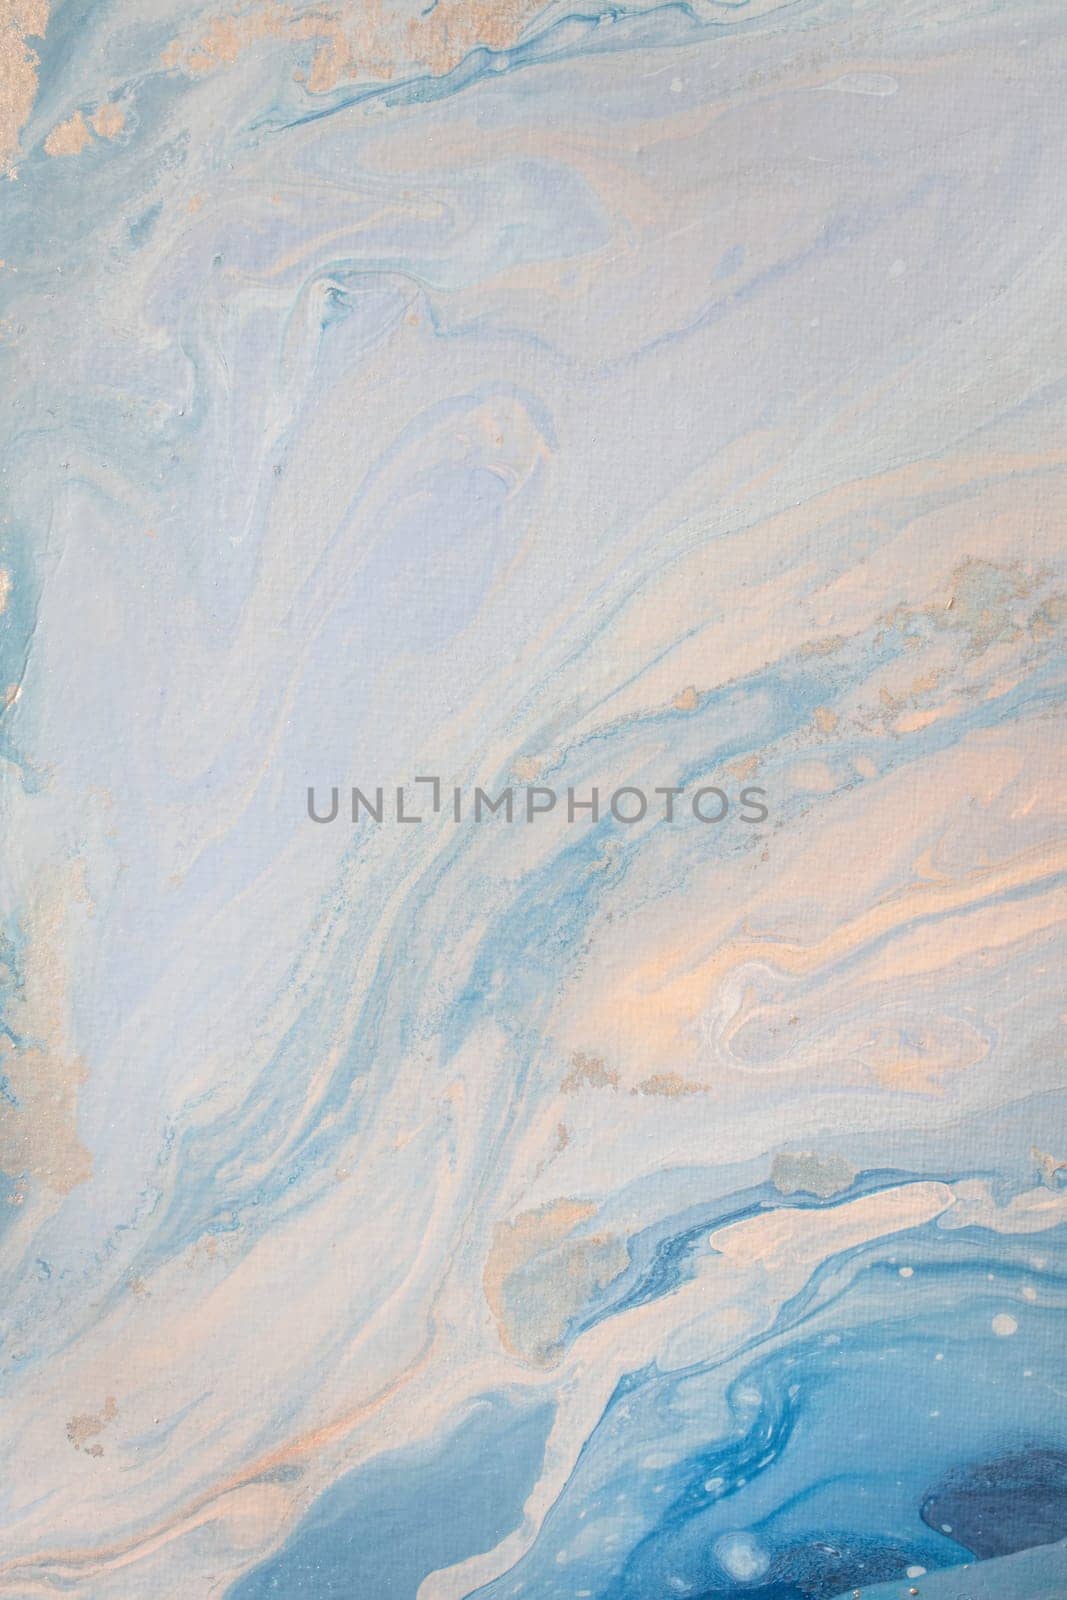 Creative abstract artwork made with translucent ink colors. Trendy wallpaper. Abstract painting, can be used as a background for wallpapers, posters, websites.